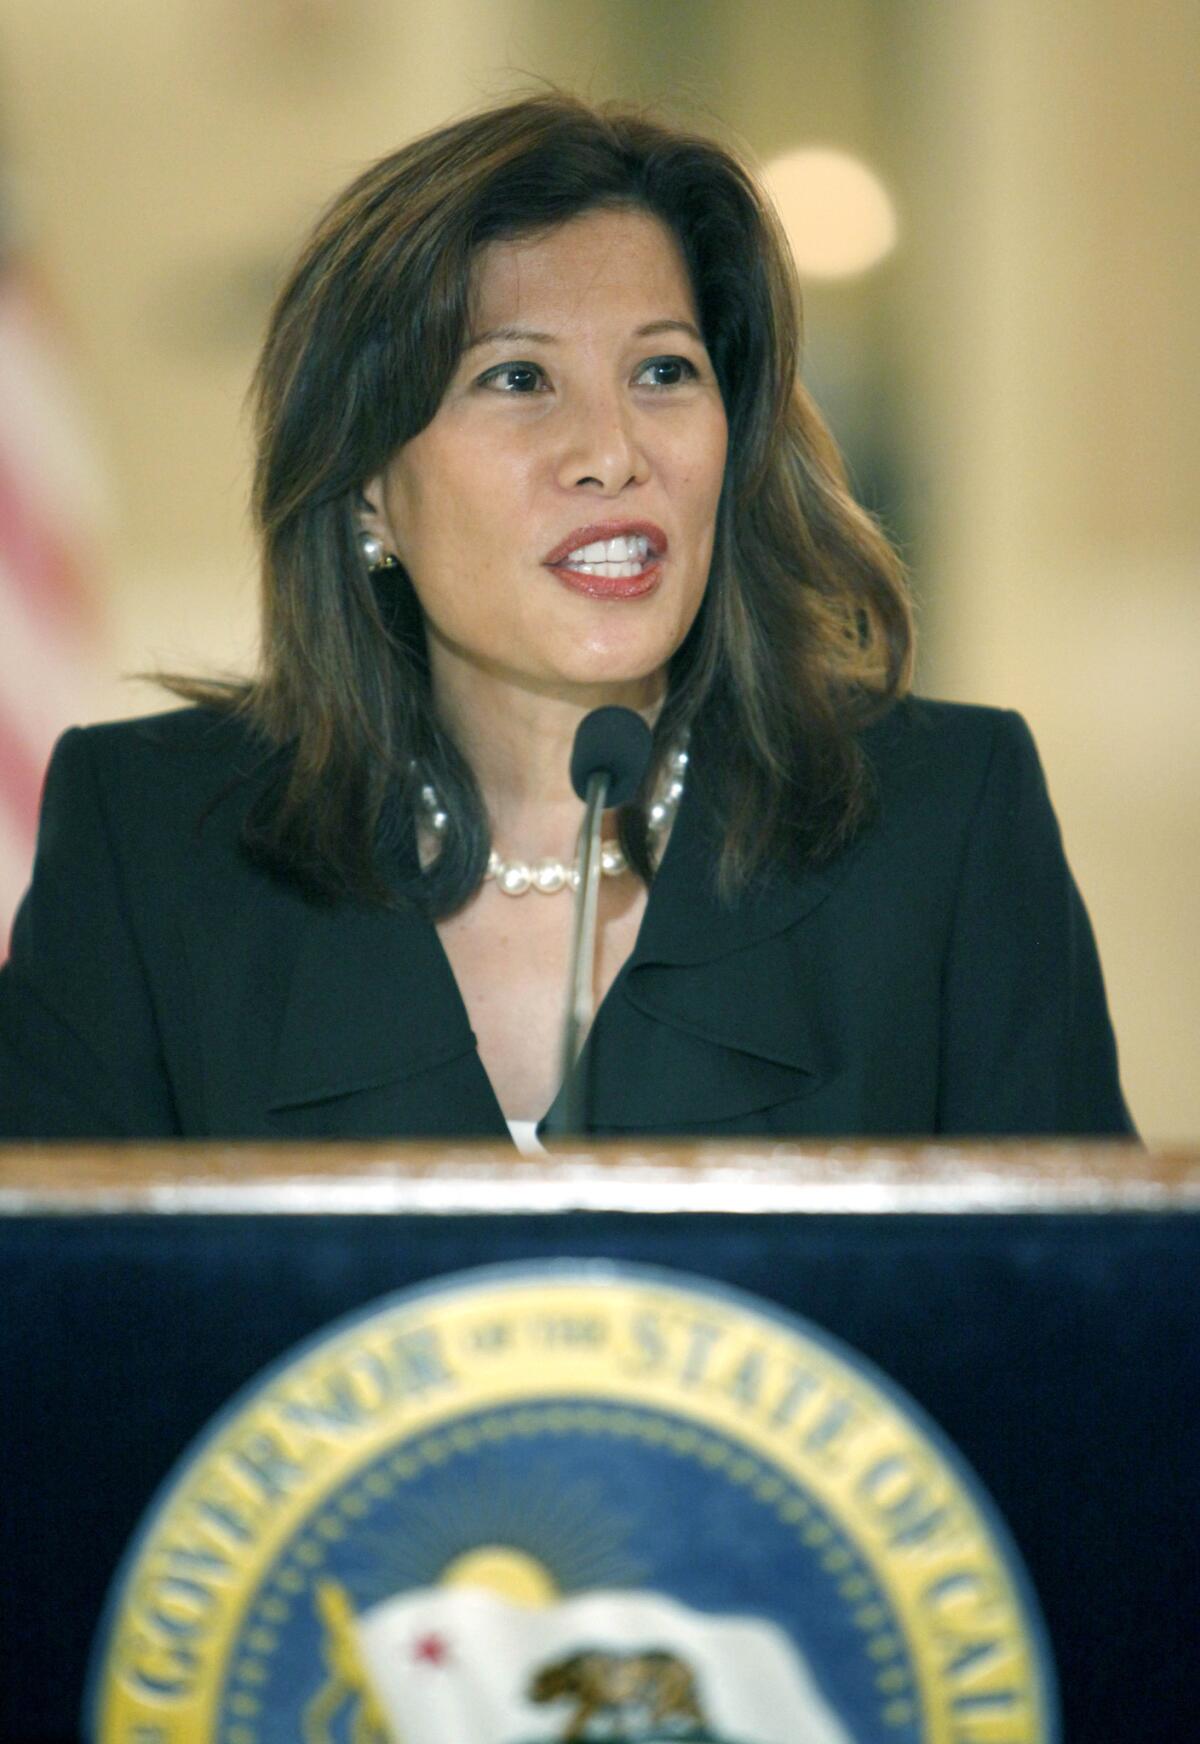 Chief Justice Tani Cantil-Sakauye says Brown's budget plan would probably require cutbacks and layoffs.